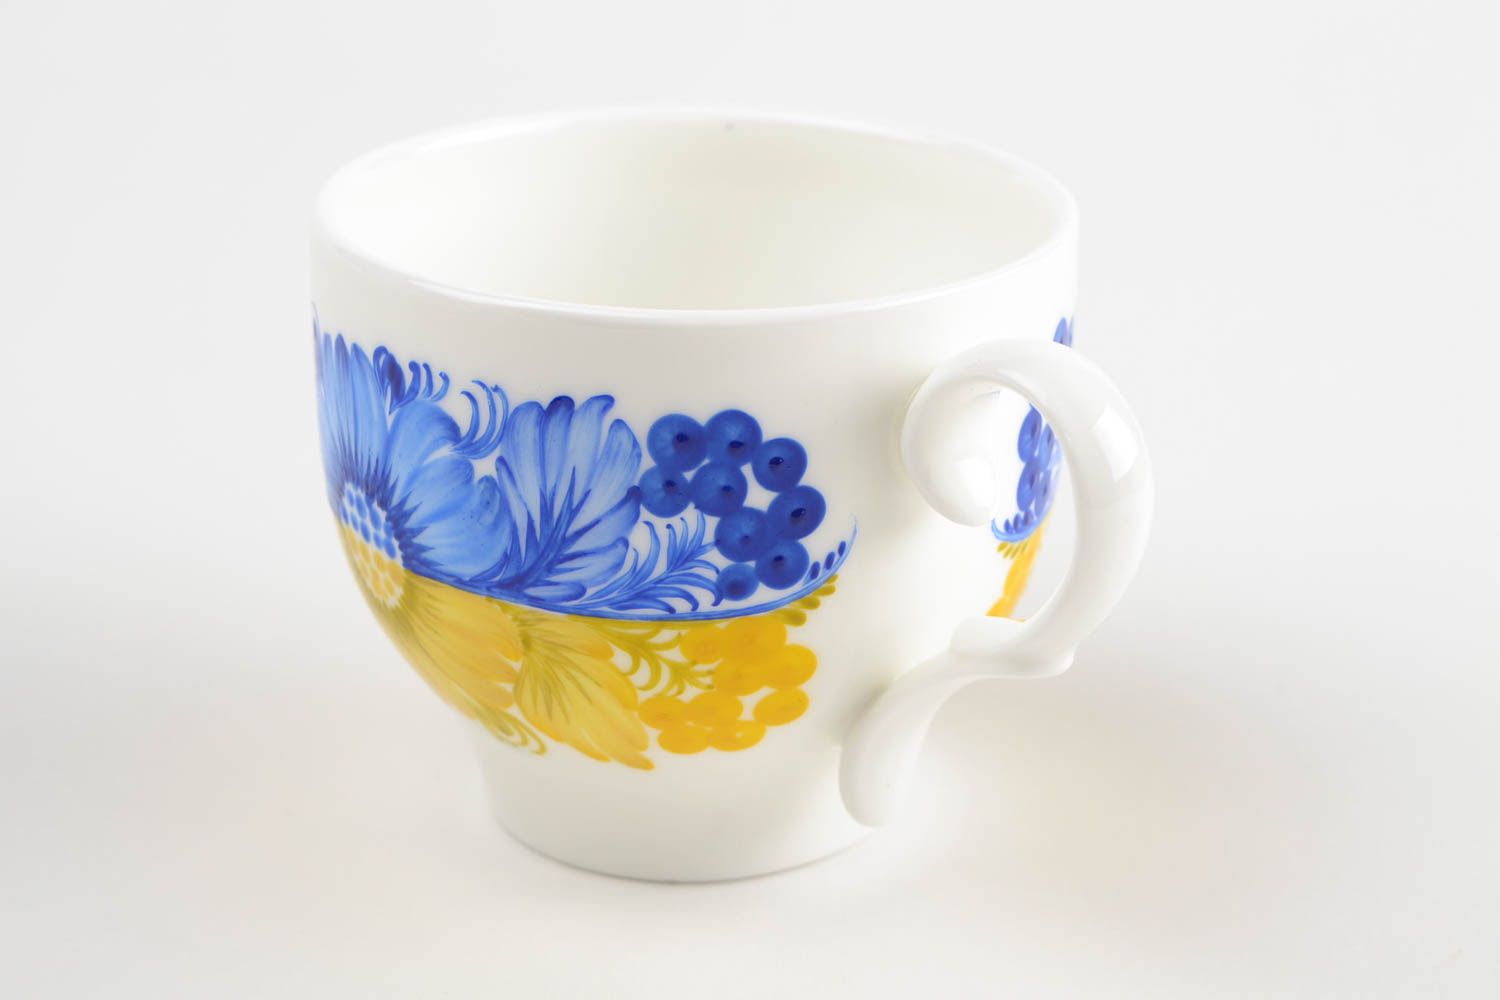 Porcelain teacup in white, yellow, and blue color with handle photo 4